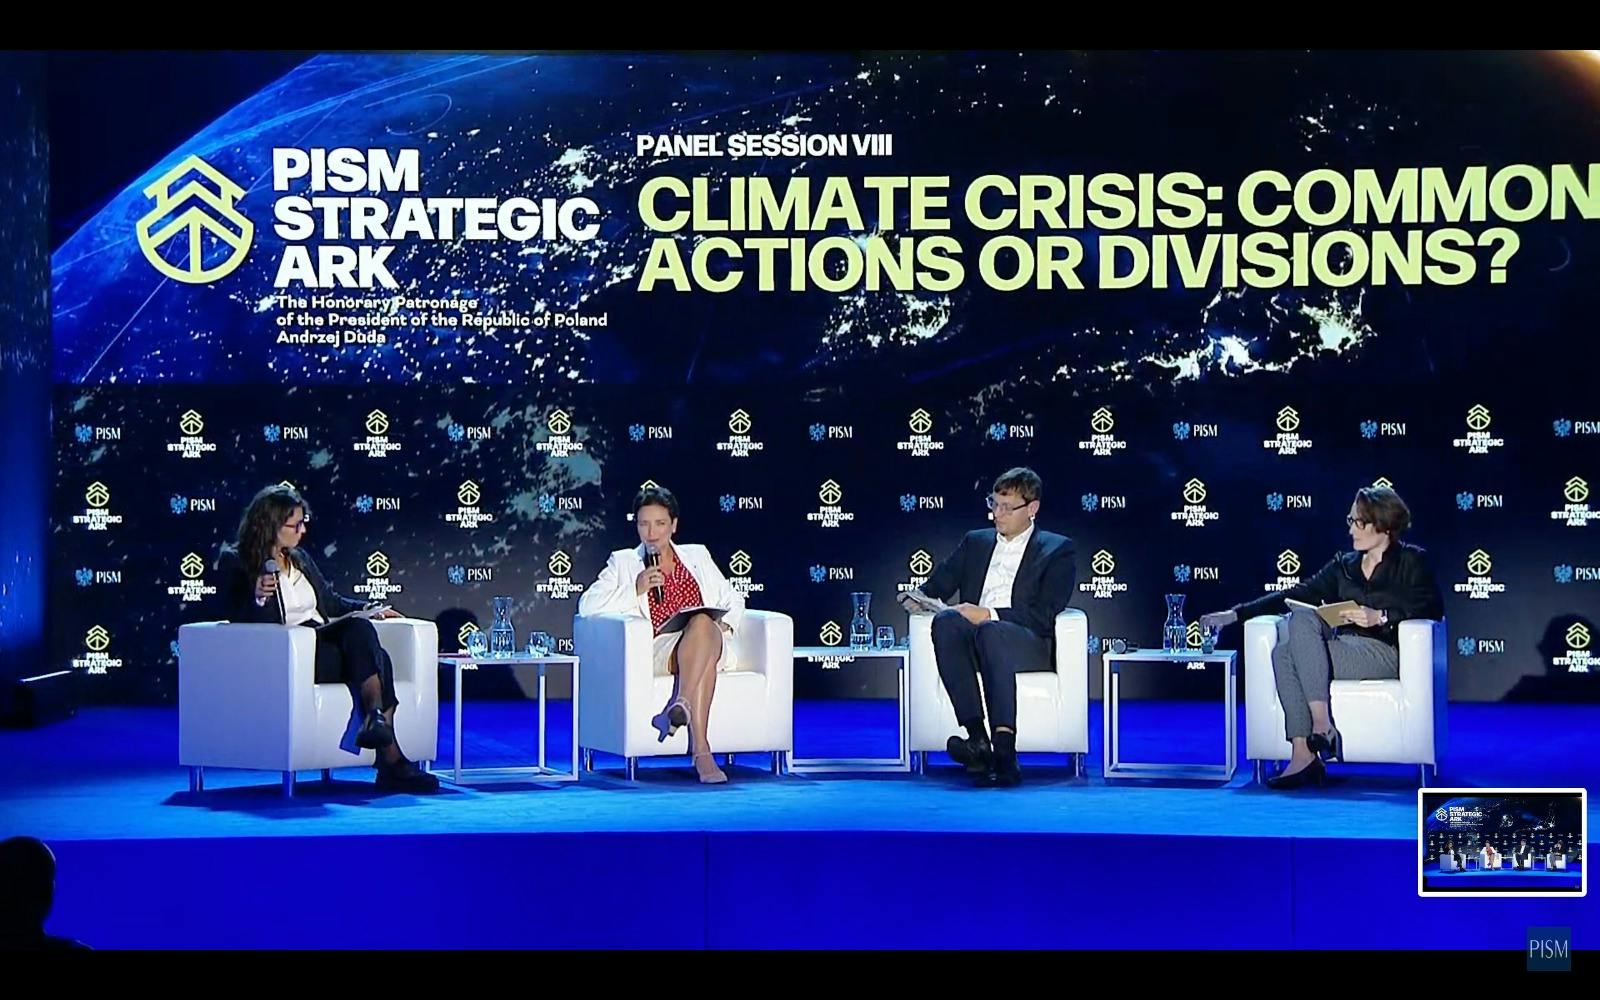 Strategic Ark Conference "Climate Crisis: Common Actions or Divisions?":